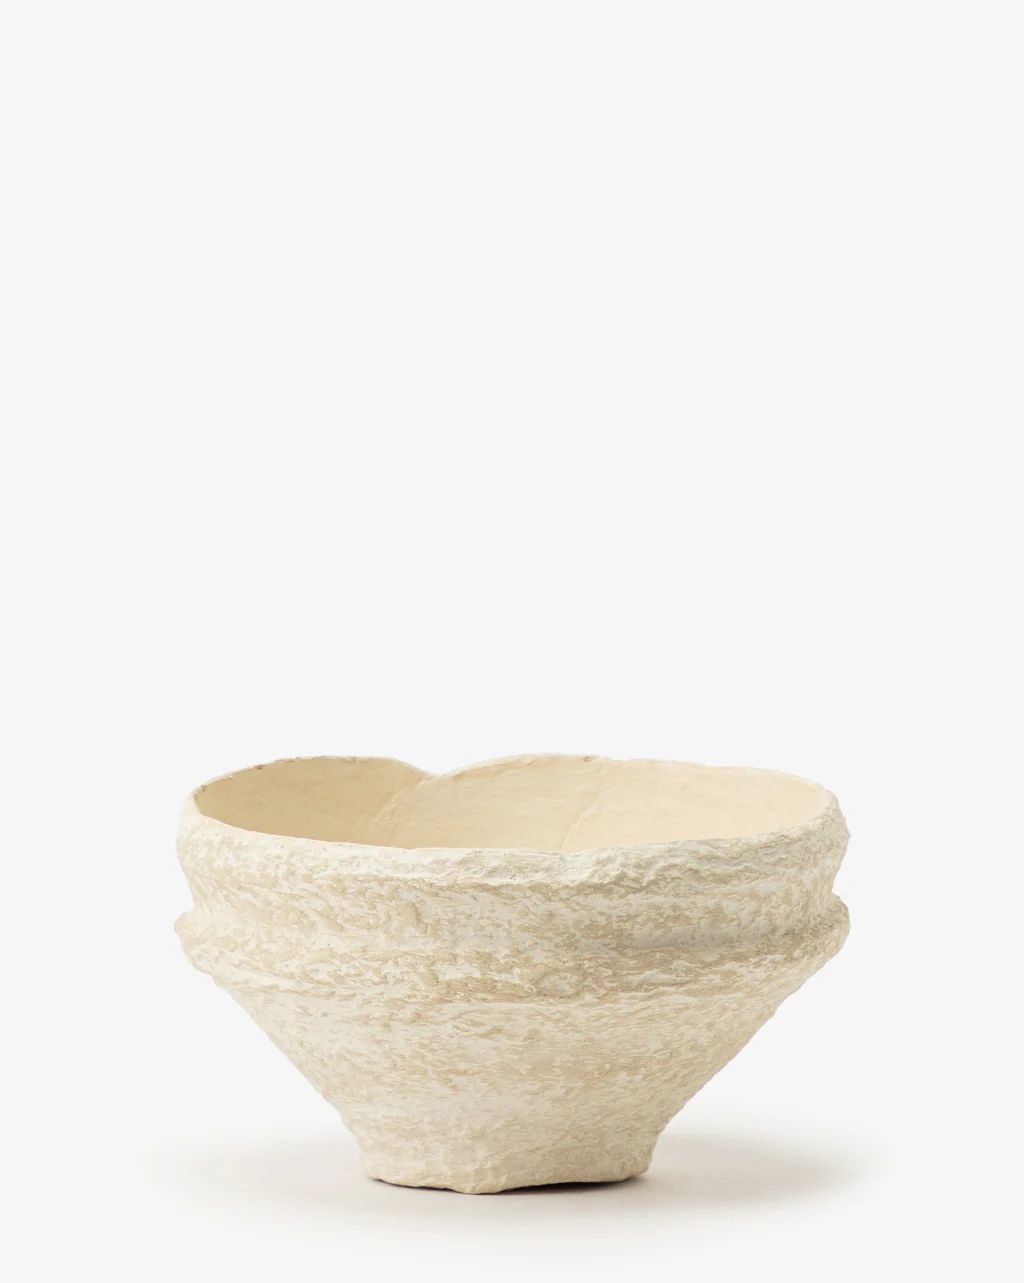 Paper Mache Crafted Bowl | McGee & Co.